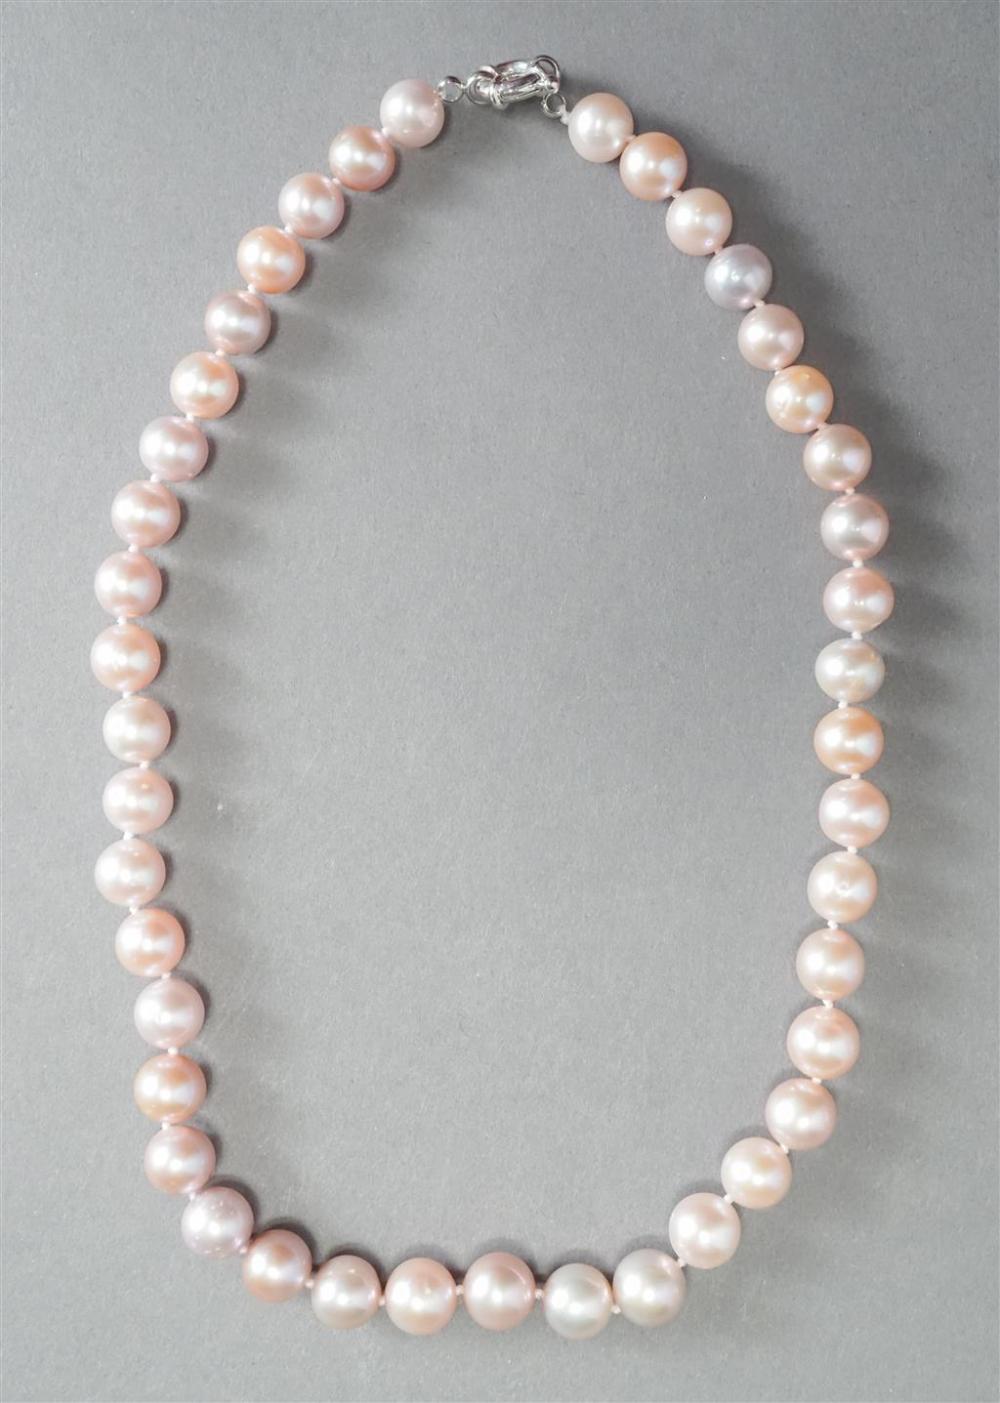 DYED PINK TONE CULTURED PEARL NECKLACE  32a15c